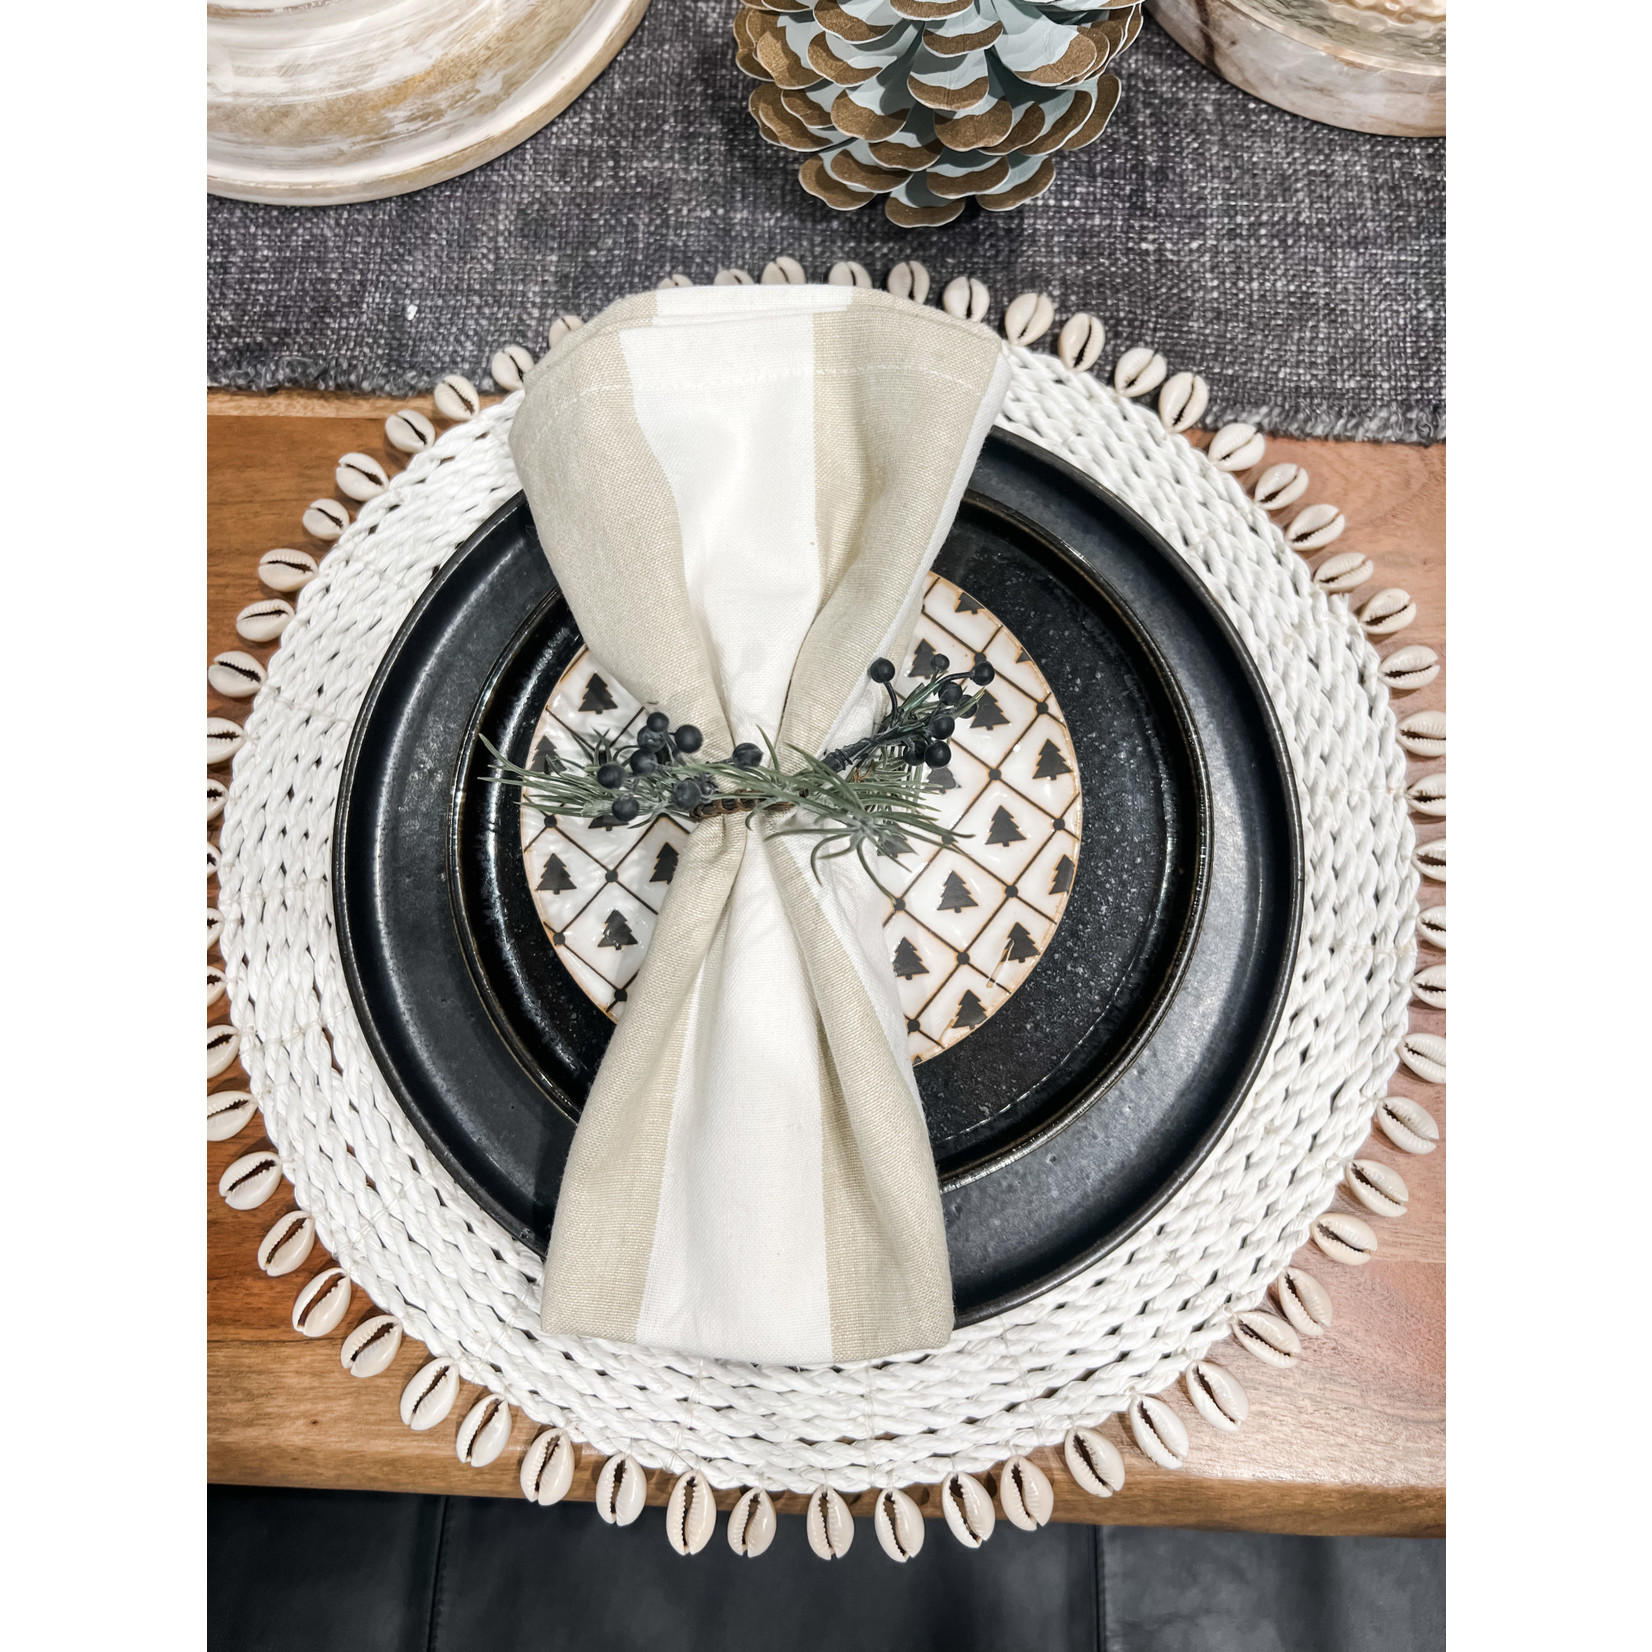 Mickler & Co. 'Contemporary Christmas' Holiday Place Setting